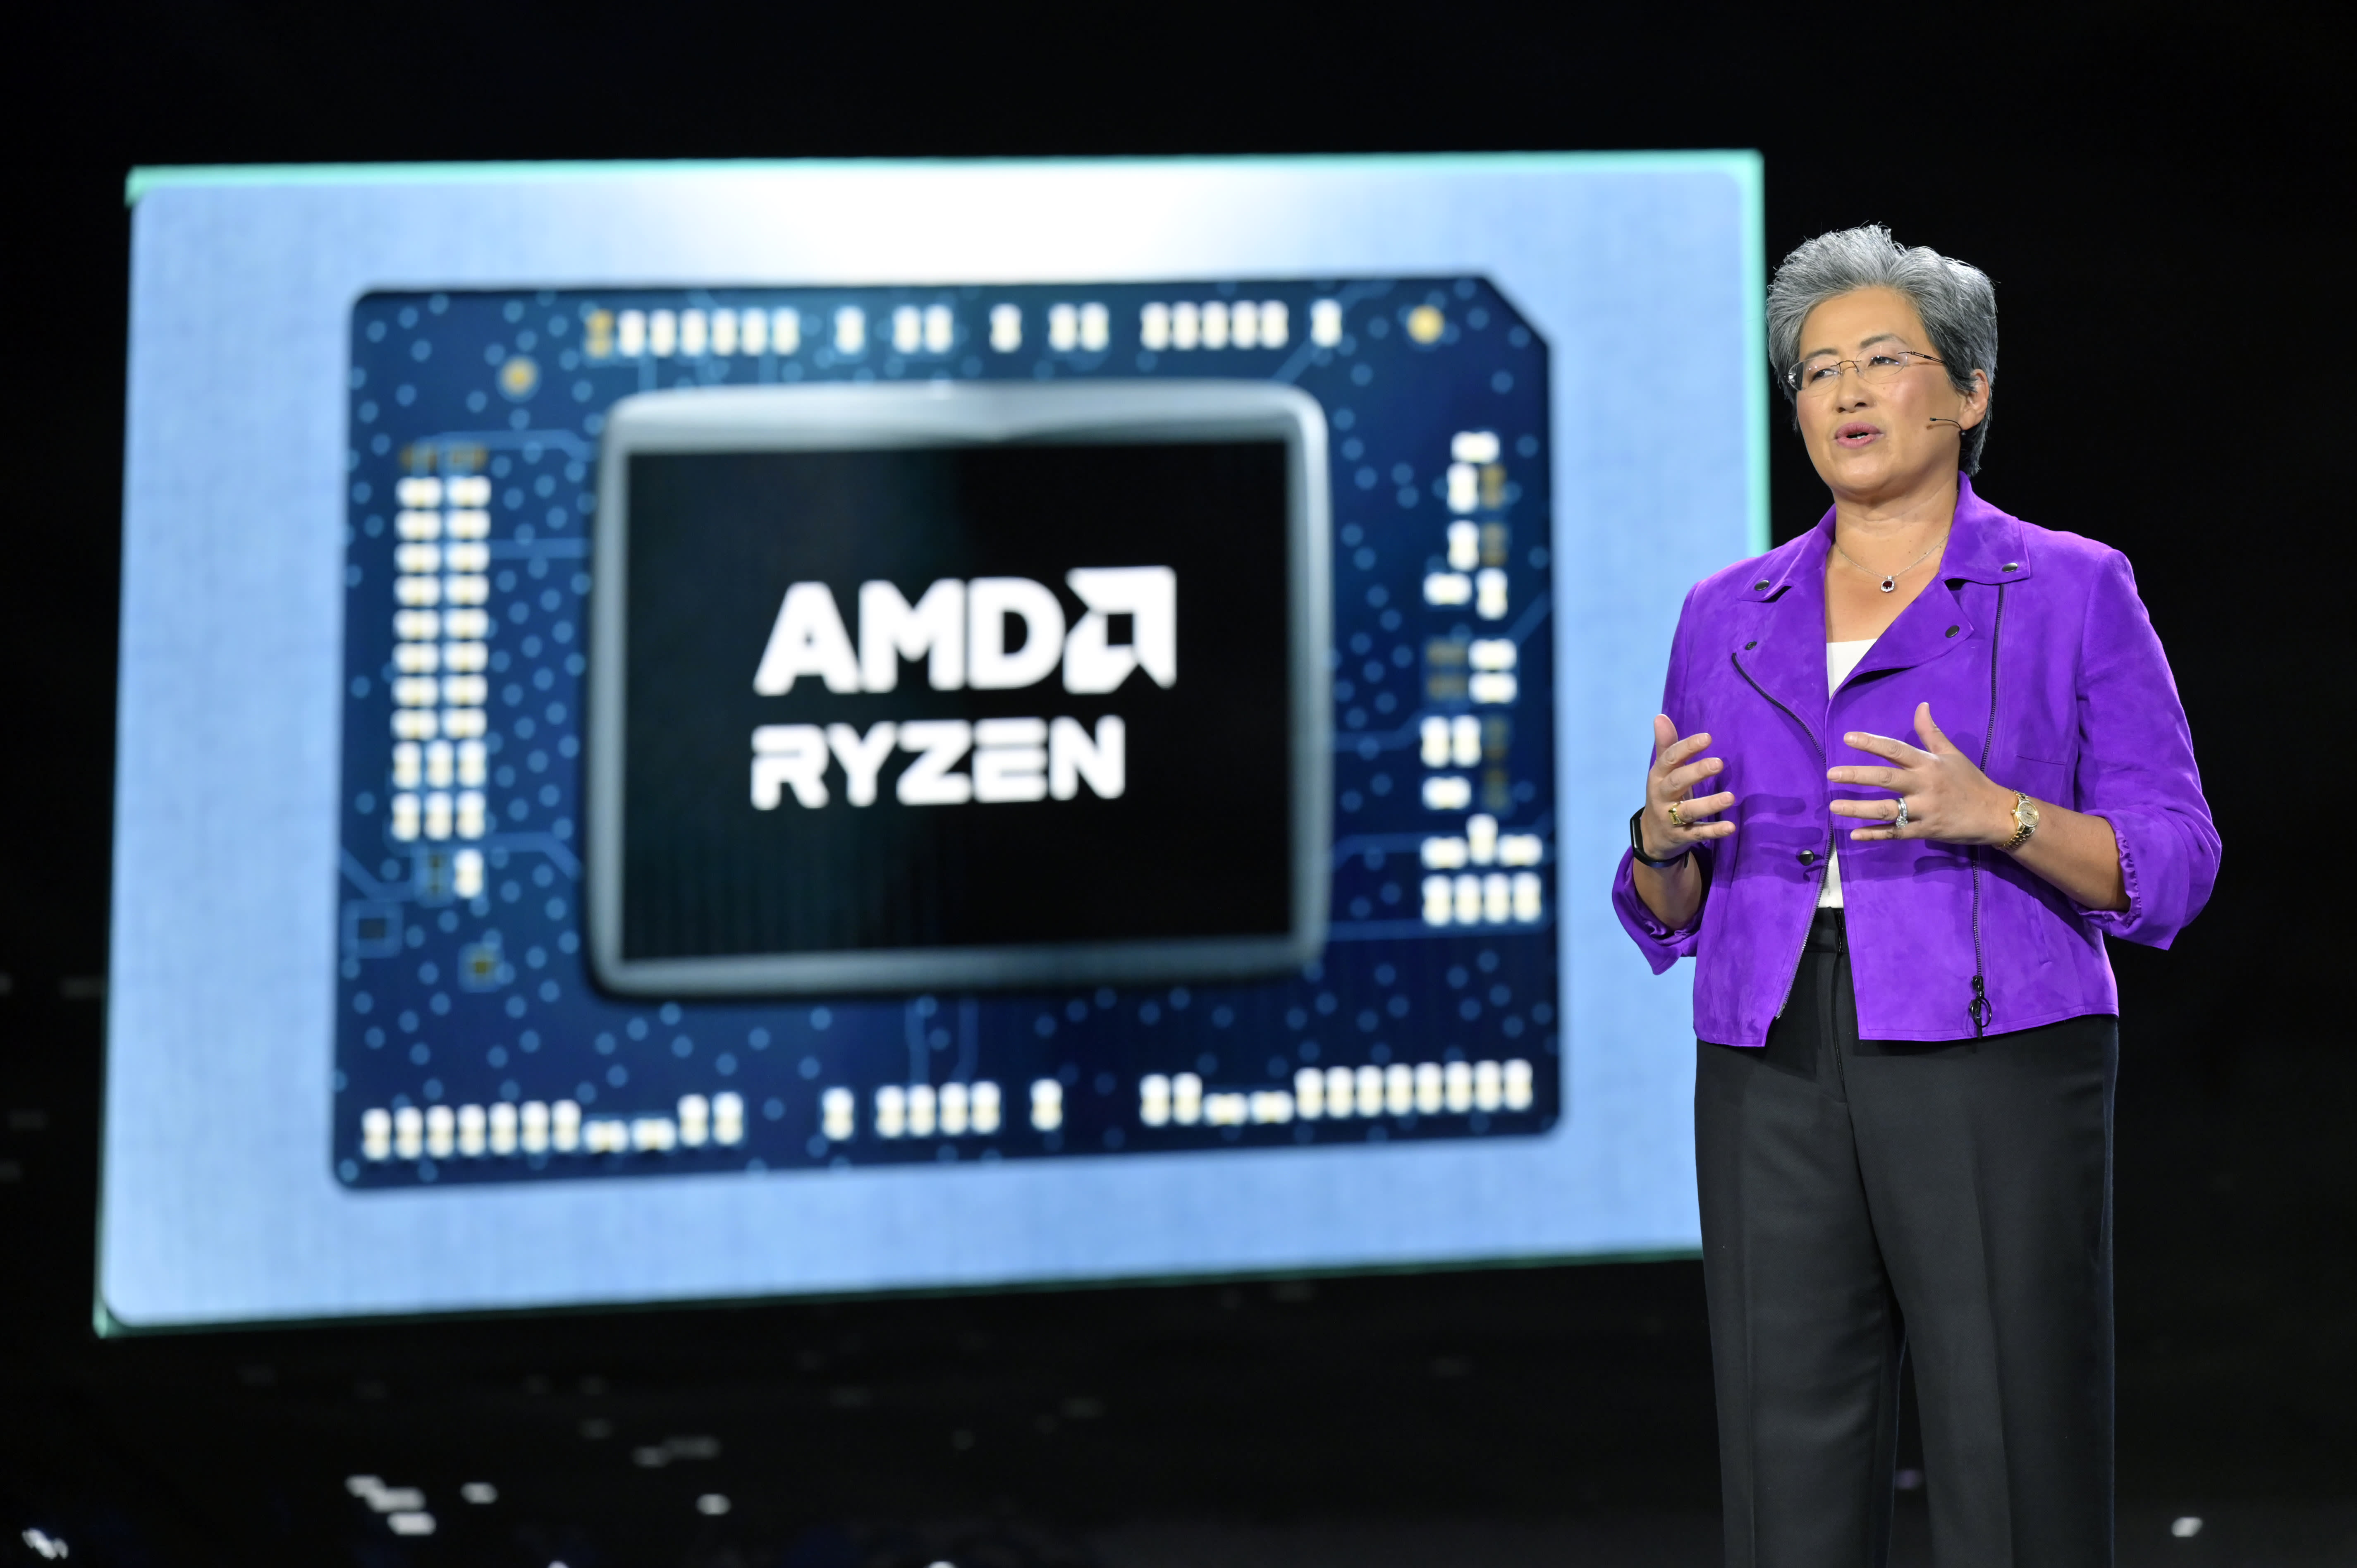 Barclays upgrades AMD, says semiconductor maker can maintain server leadership while branching out